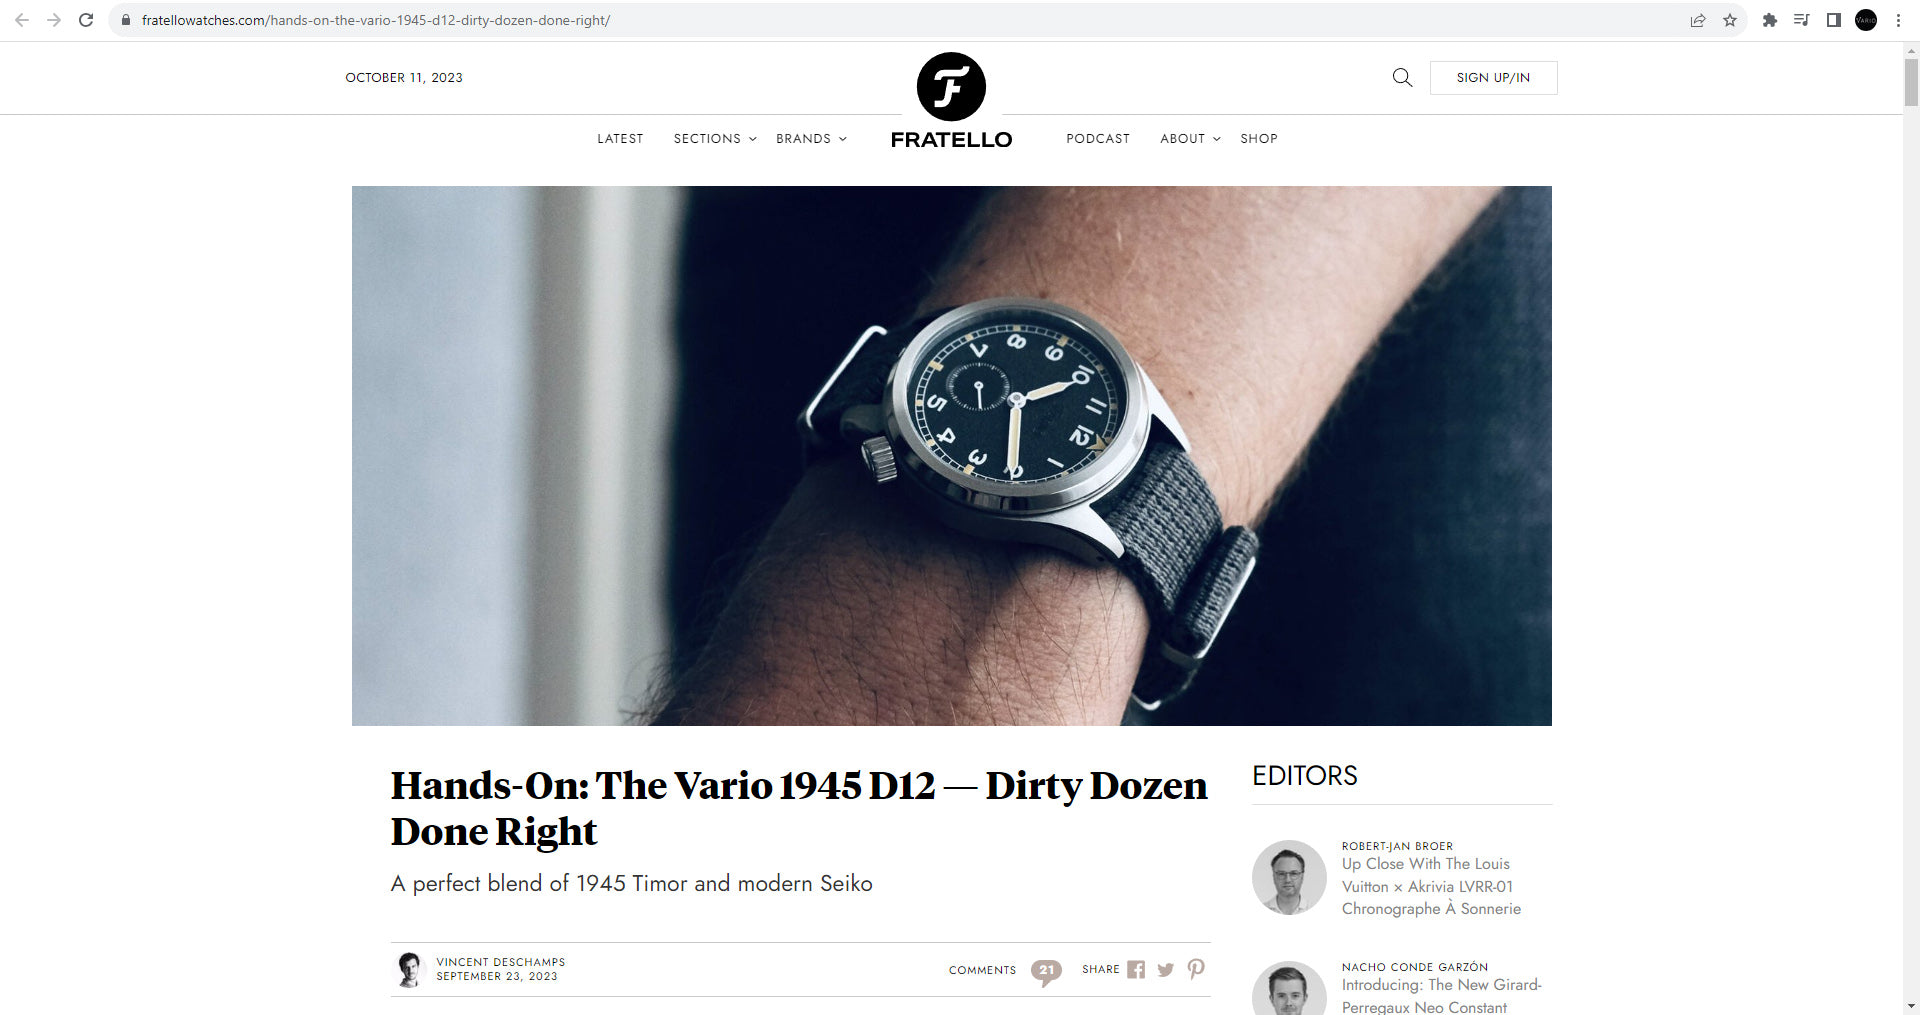 Vario 1945 D12 Field Watch featured on Fratello